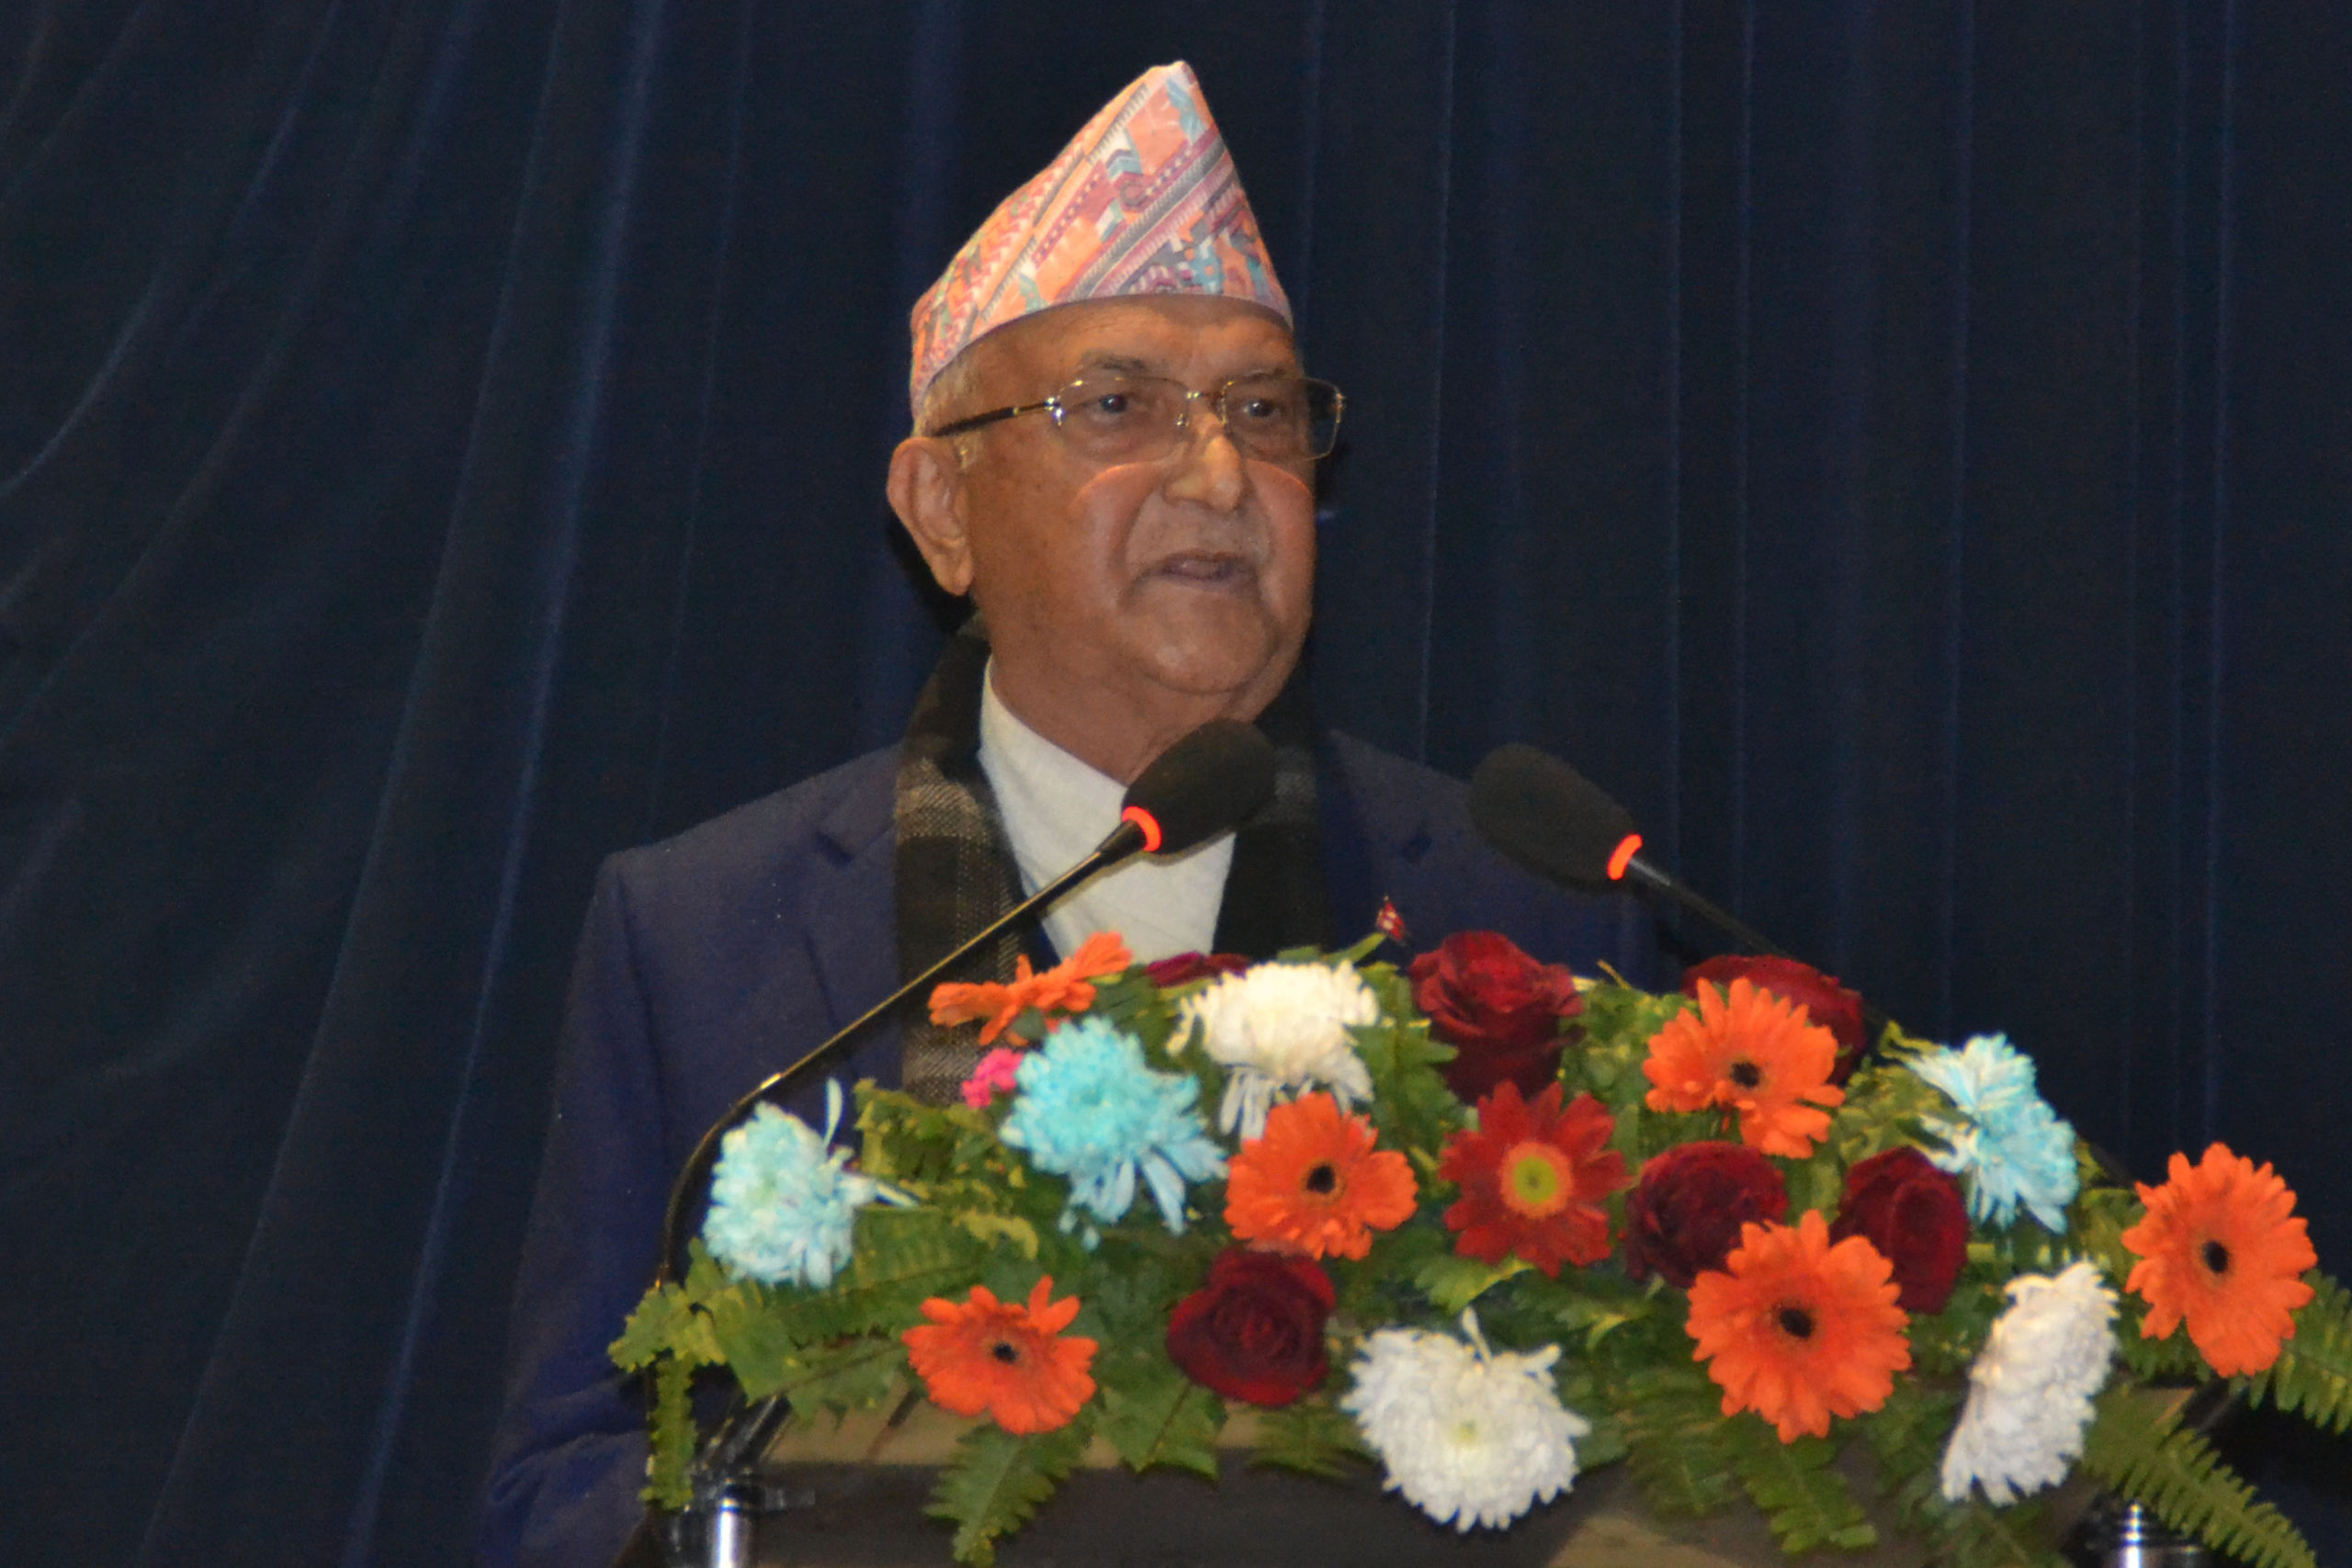 Elections will be held in free and fair manner: PM Oli